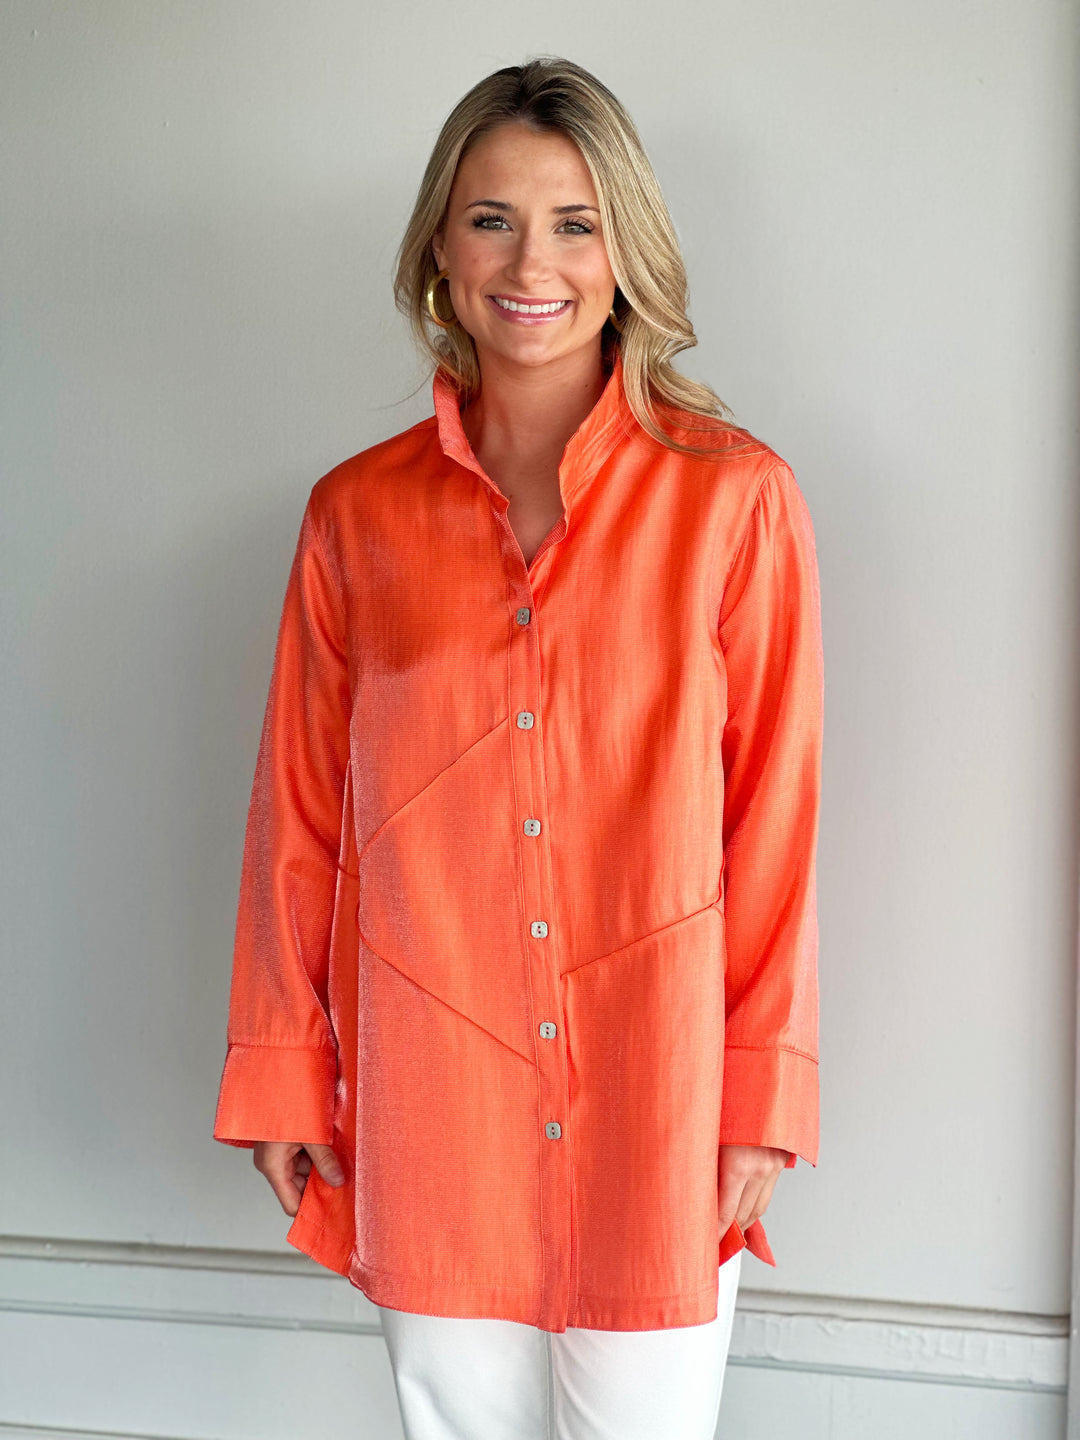 A La Carte Shimmer Shirt in Coral